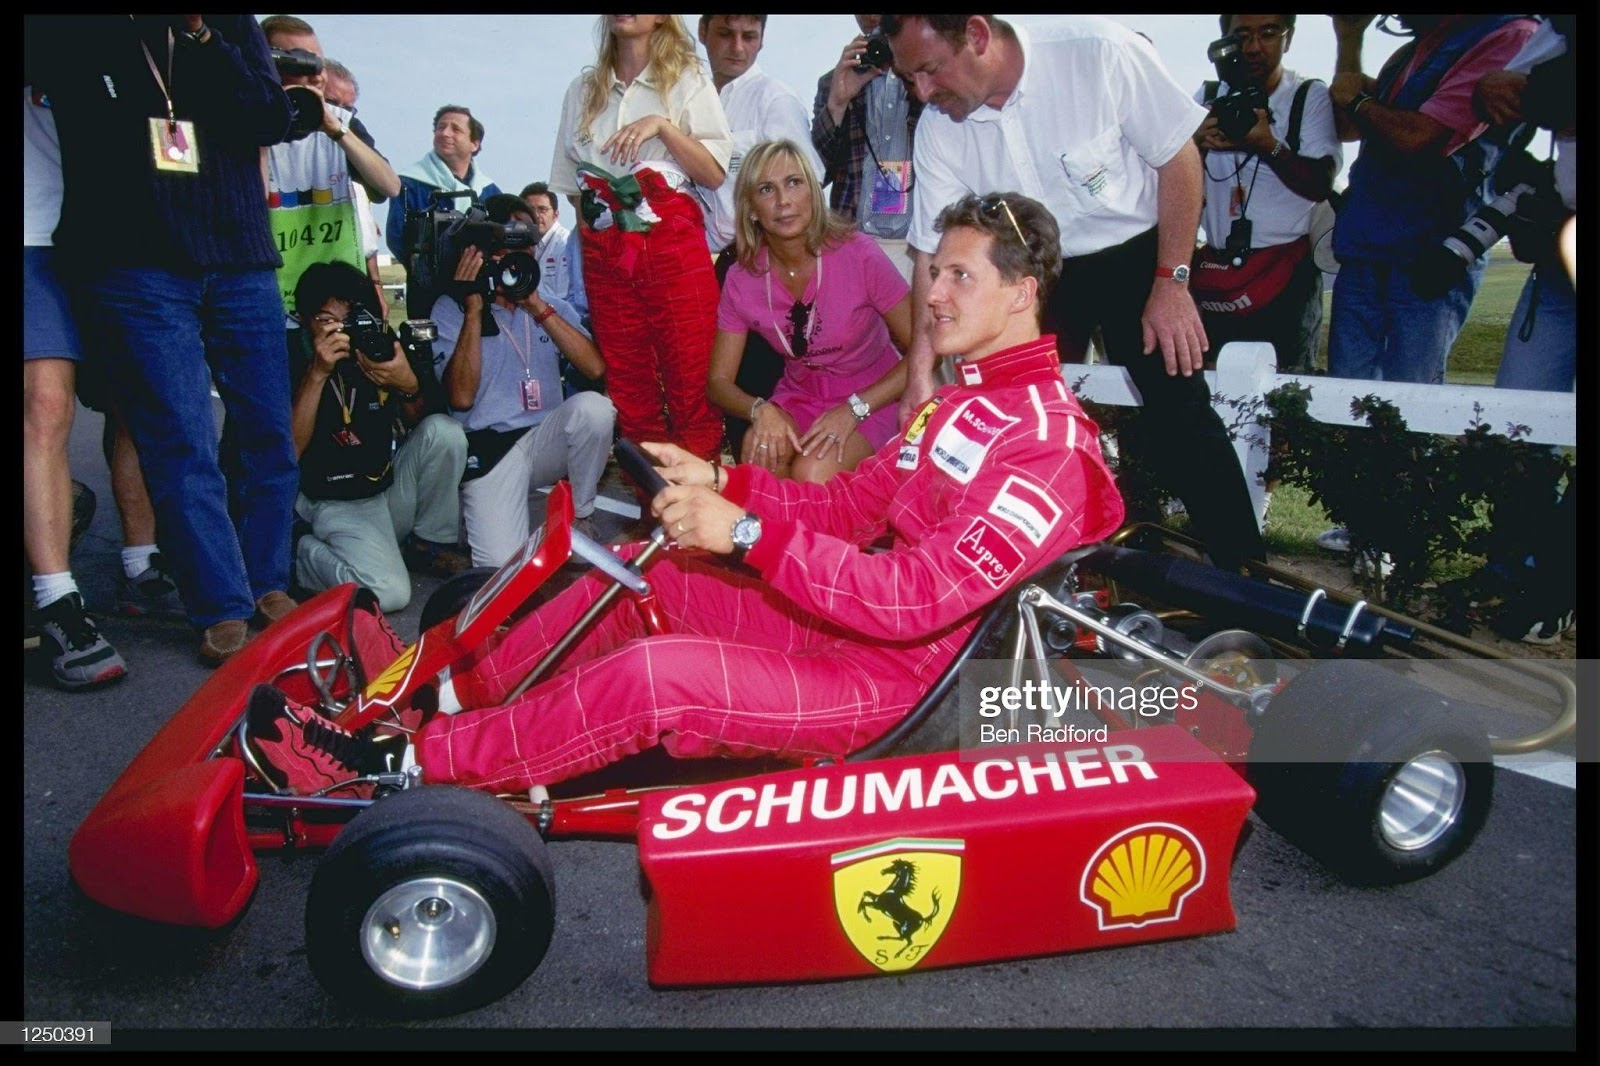 27 - 30 Jun 1996: Michael Schumacher relaxes with a spot of go-karting during the French Grand Prix in Magny Cours.